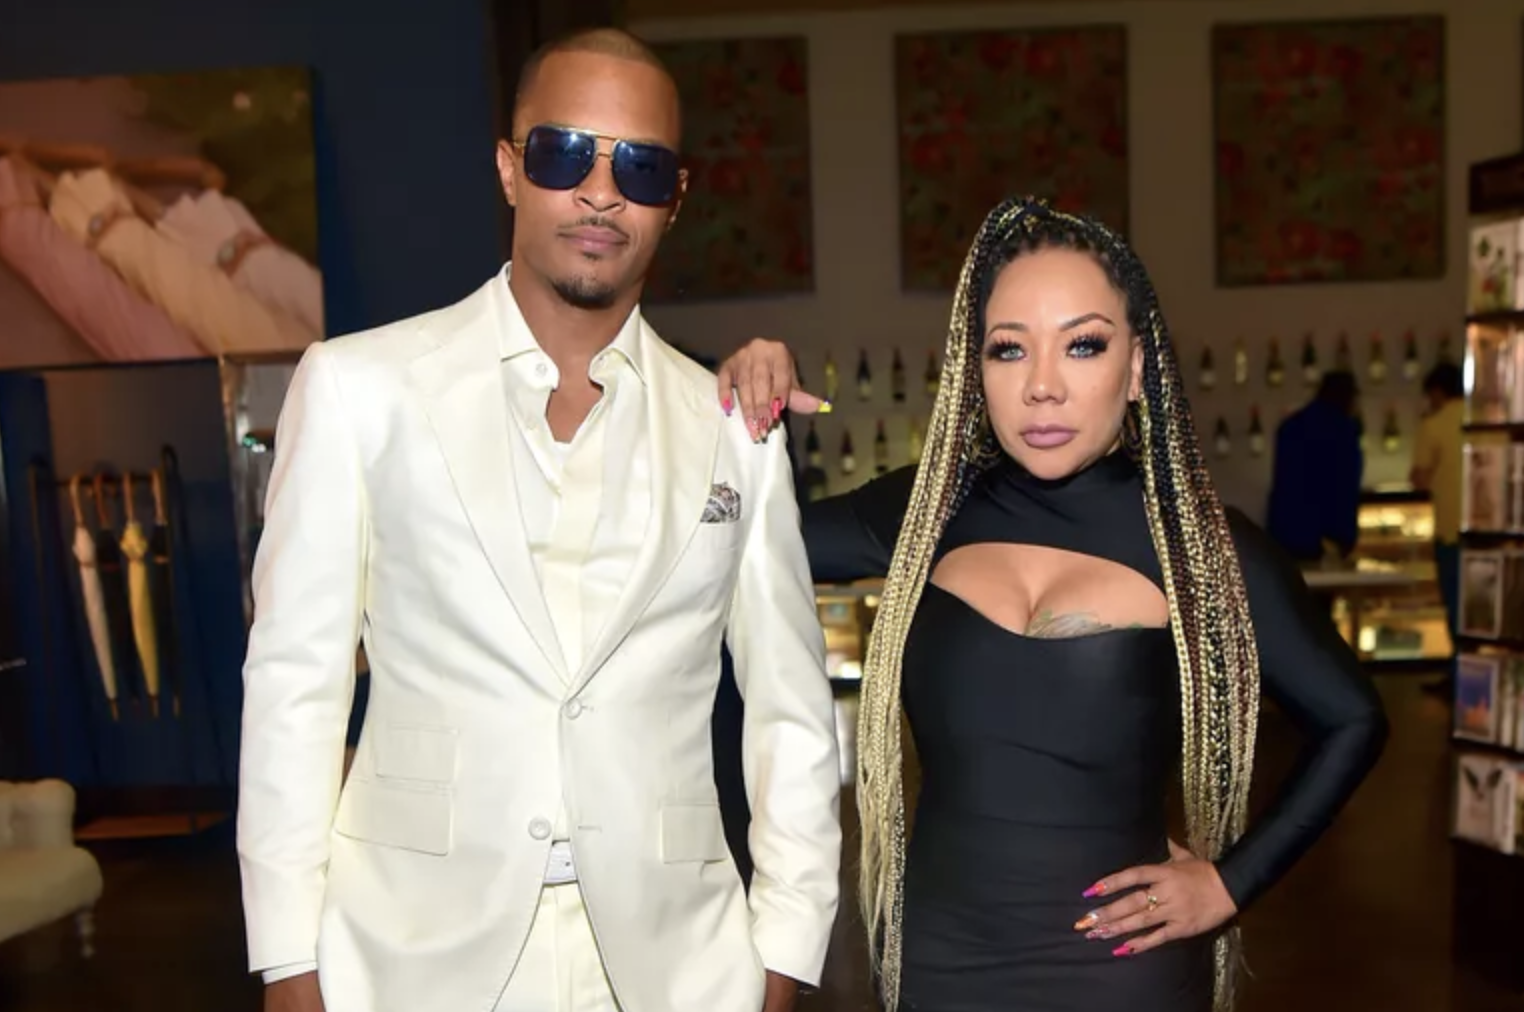 Rapper T.I. and wife Tiny accused of drugging and raping woman in new lawsuit